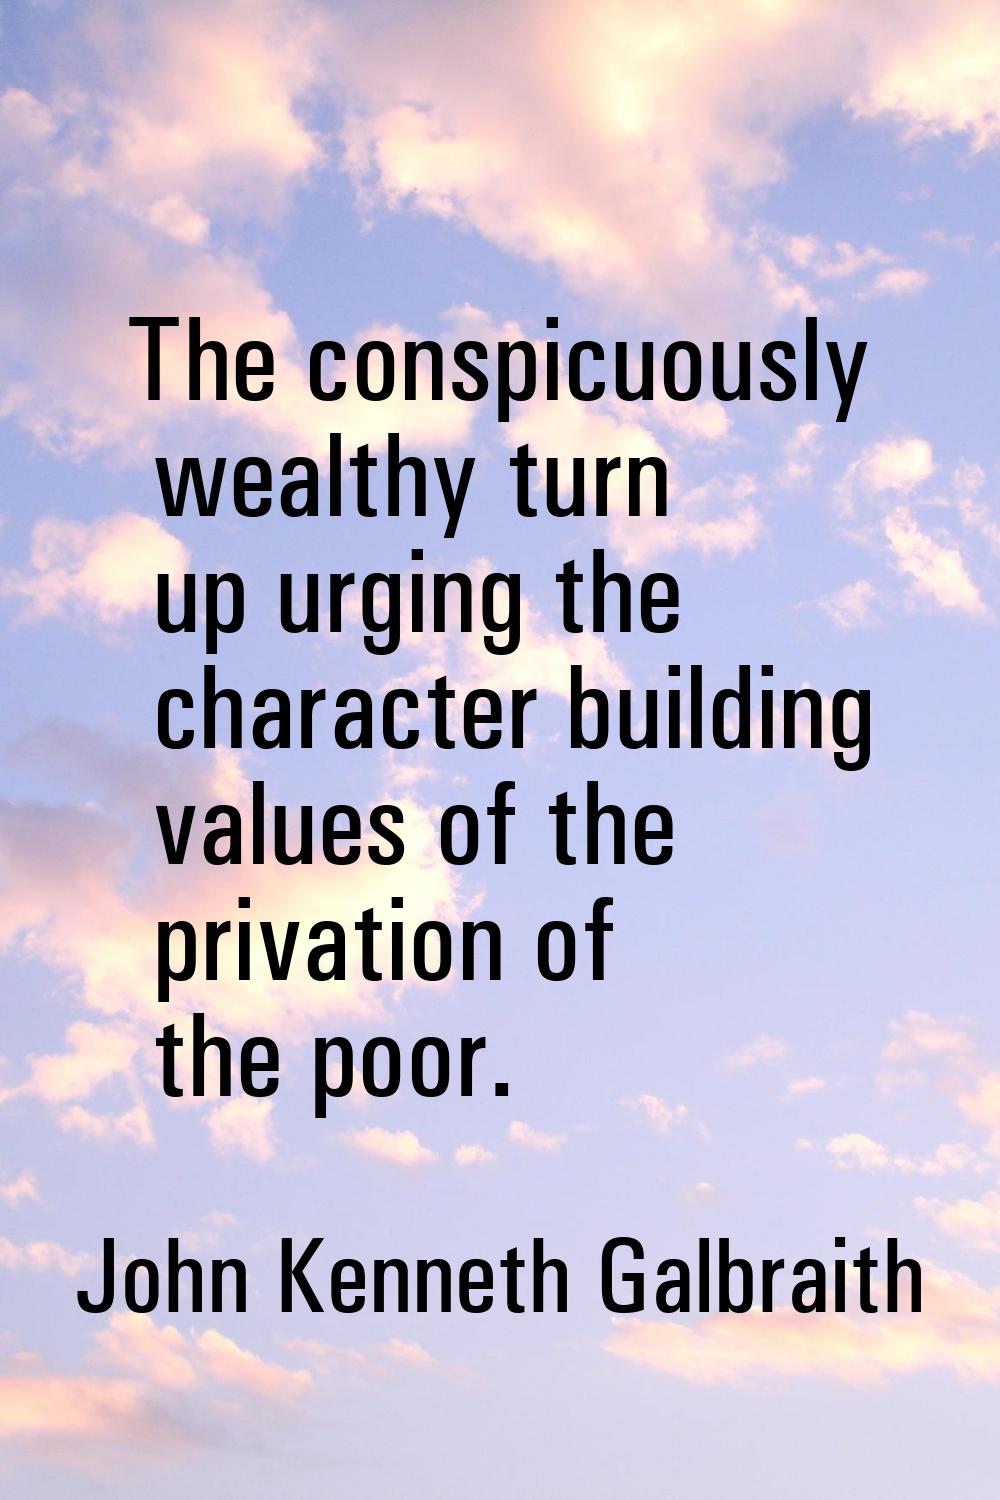 The conspicuously wealthy turn up urging the character building values of the privation of the poor